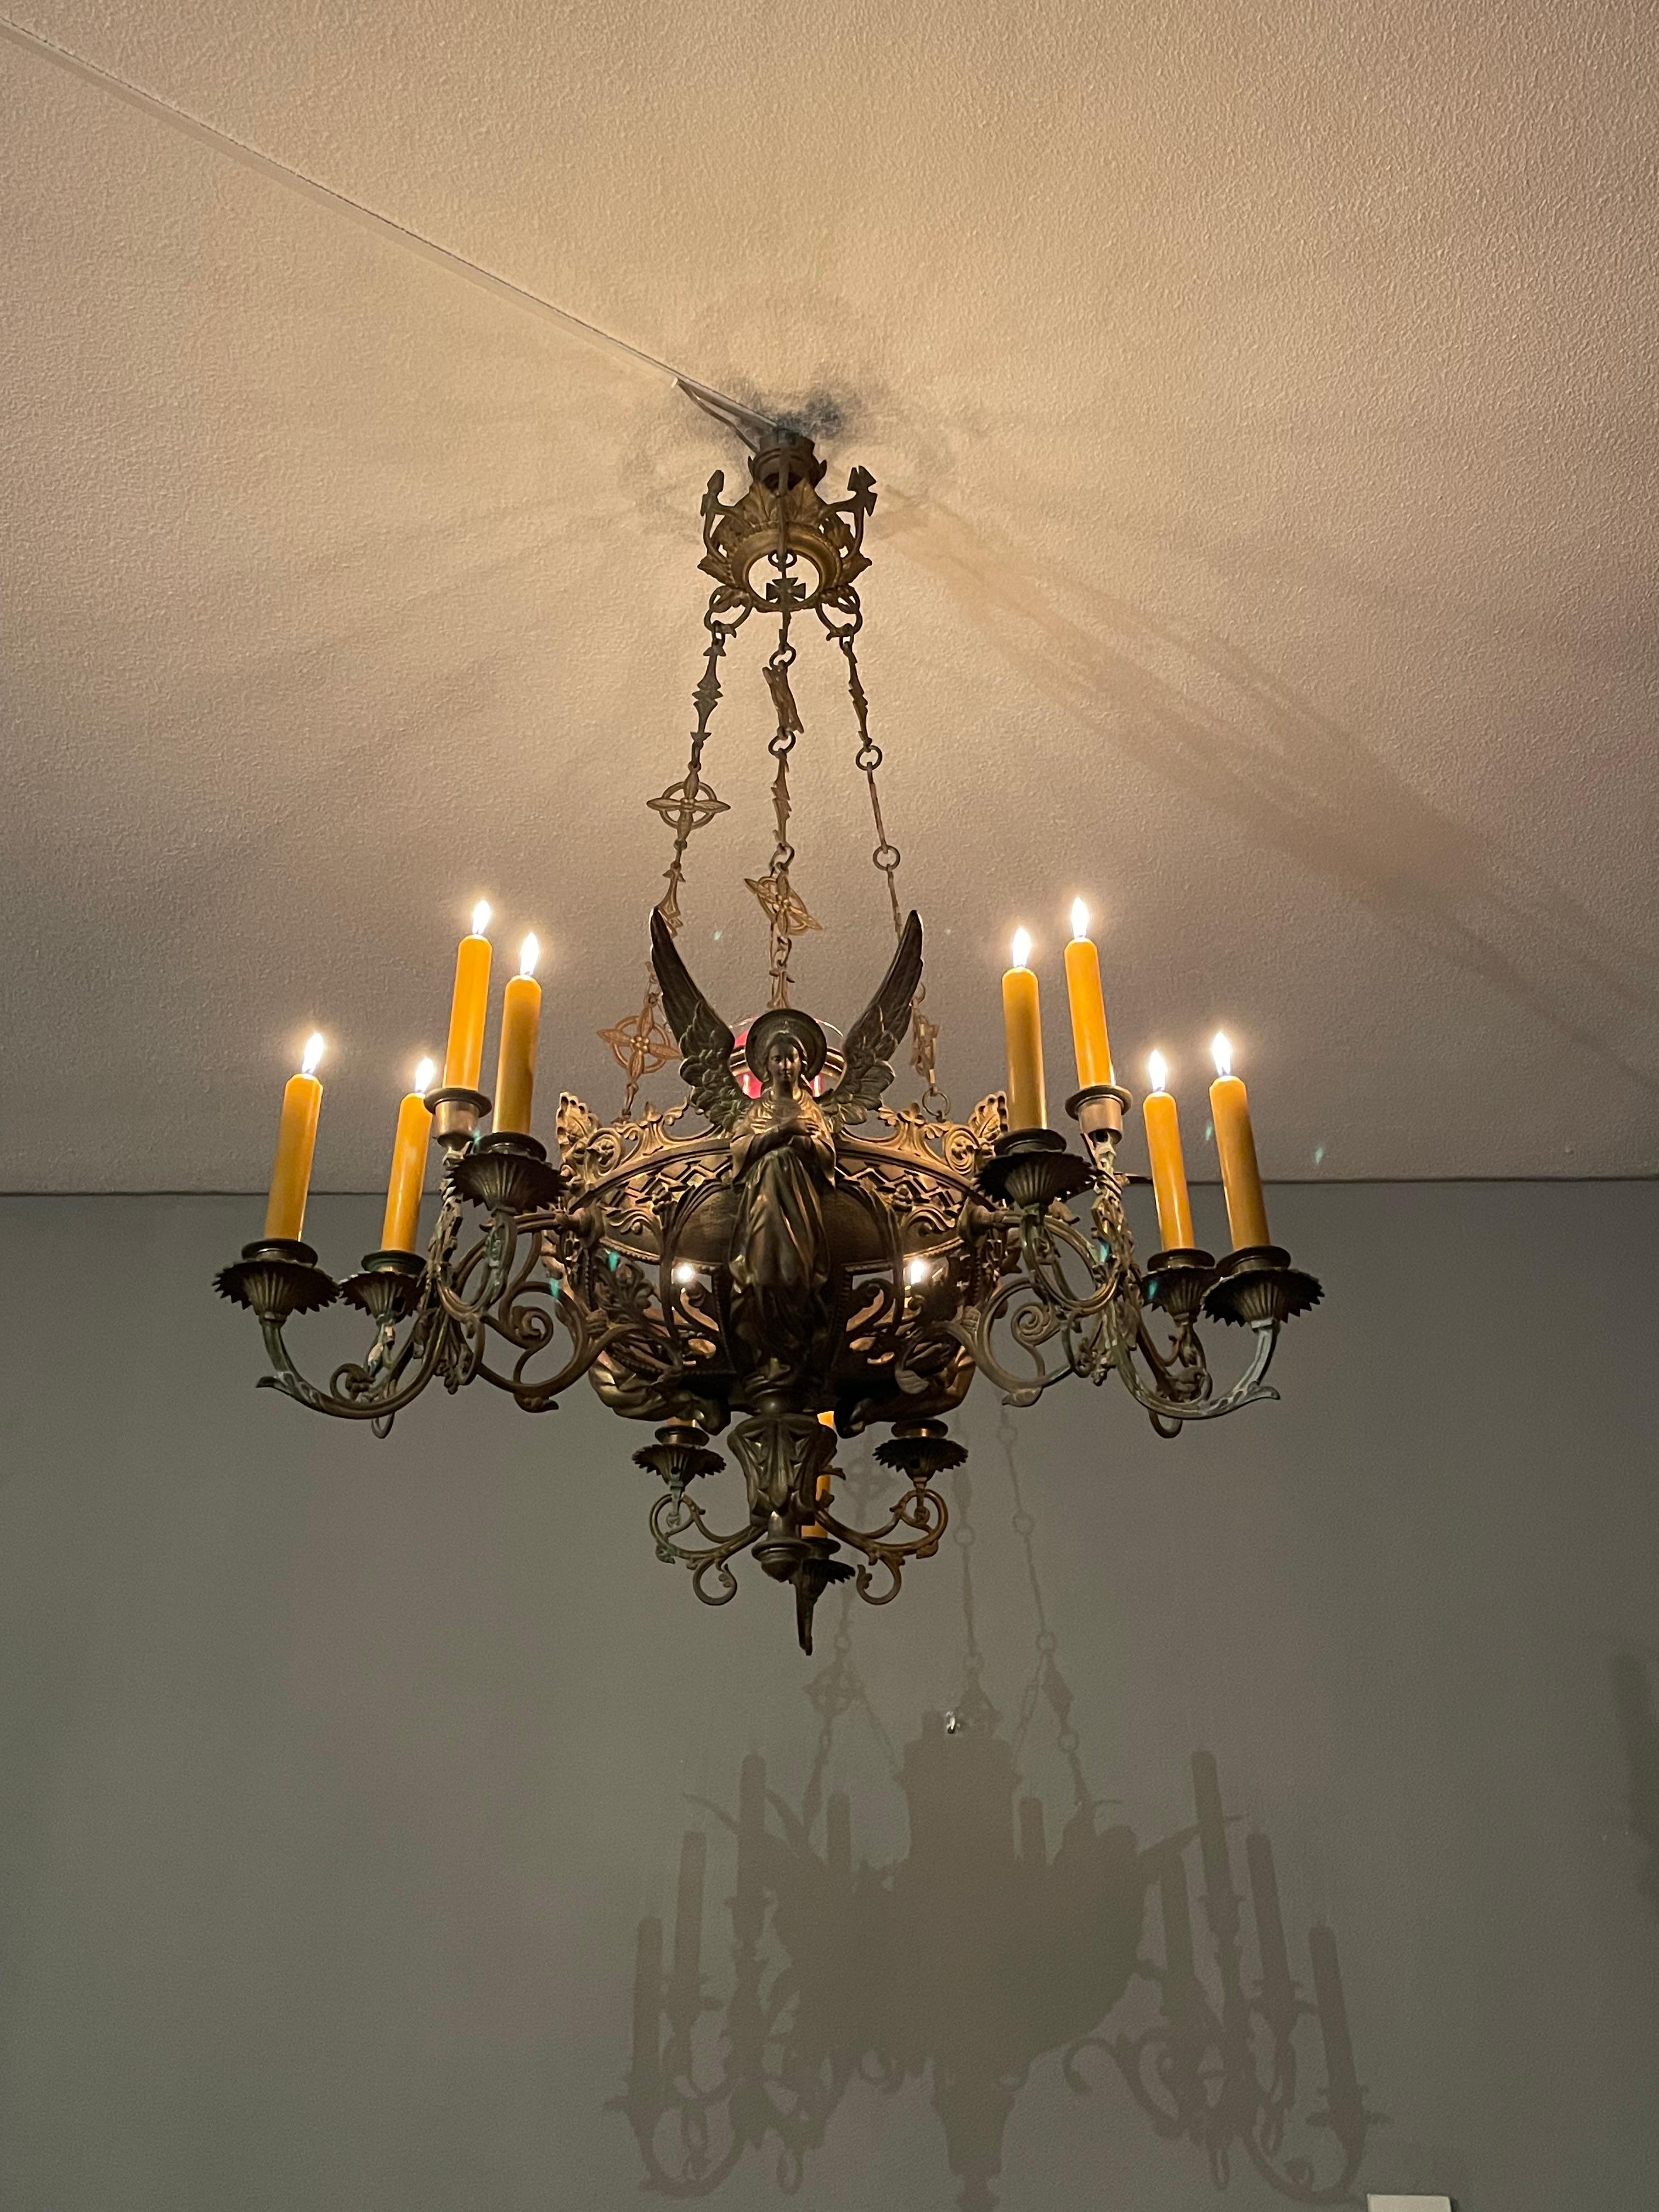 Bronze Gothic Revival Candle Chandelier w. Virgin Mary & Marian Cross Sculptures For Sale 12